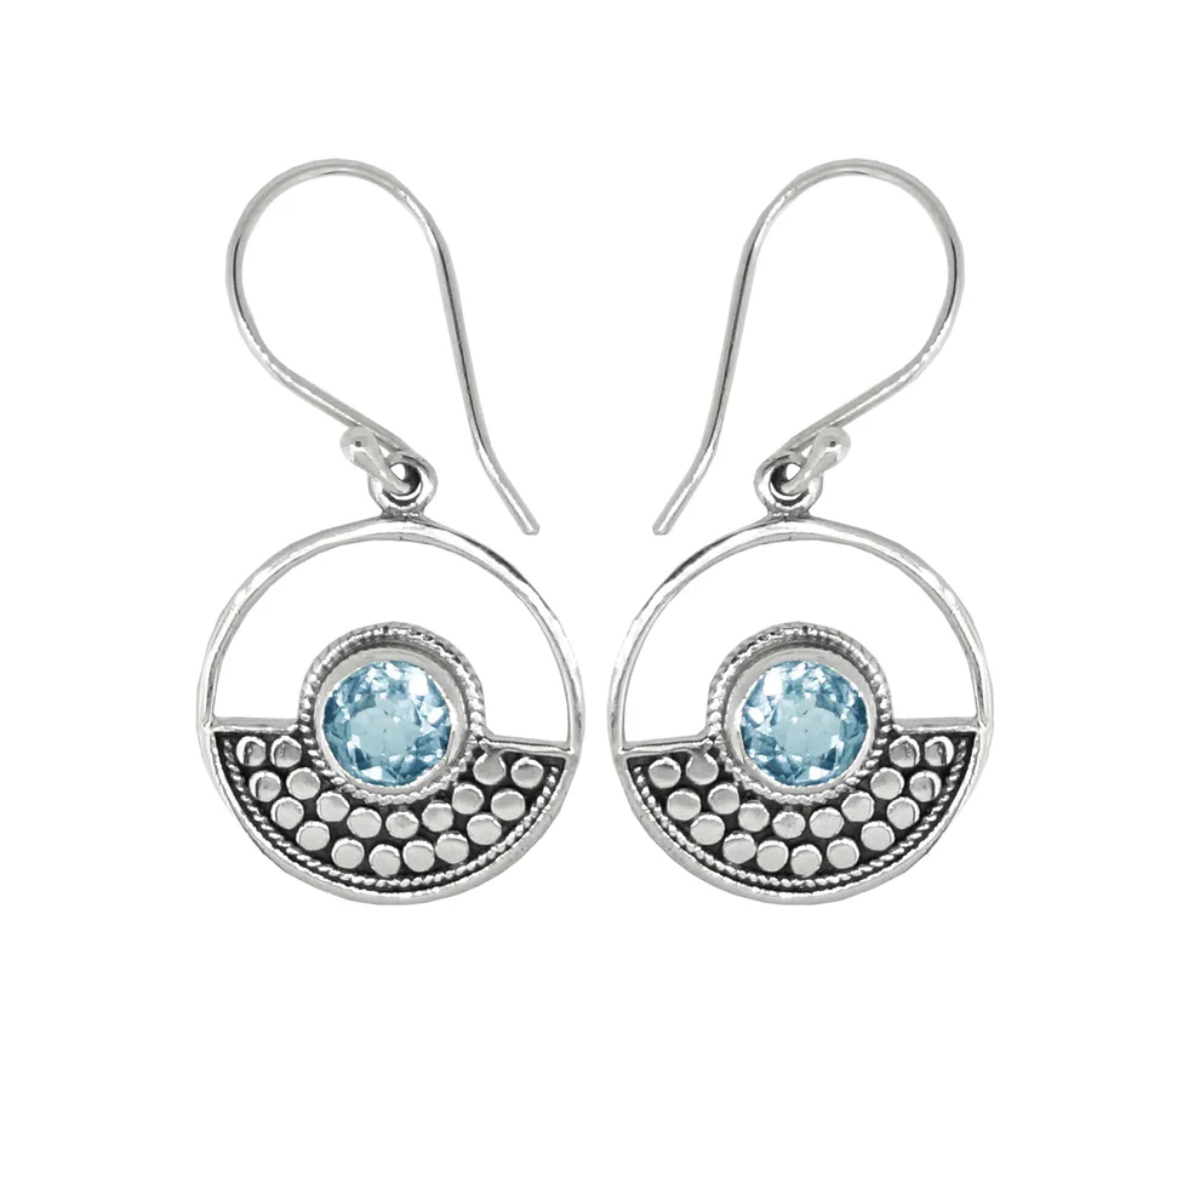 Sterling Silver design in a circle surrounds a circular blue topaz stone on ear wires. Half of the circle is dotted with an oxidized sterling design, the other half is open.  On a plain white background. 